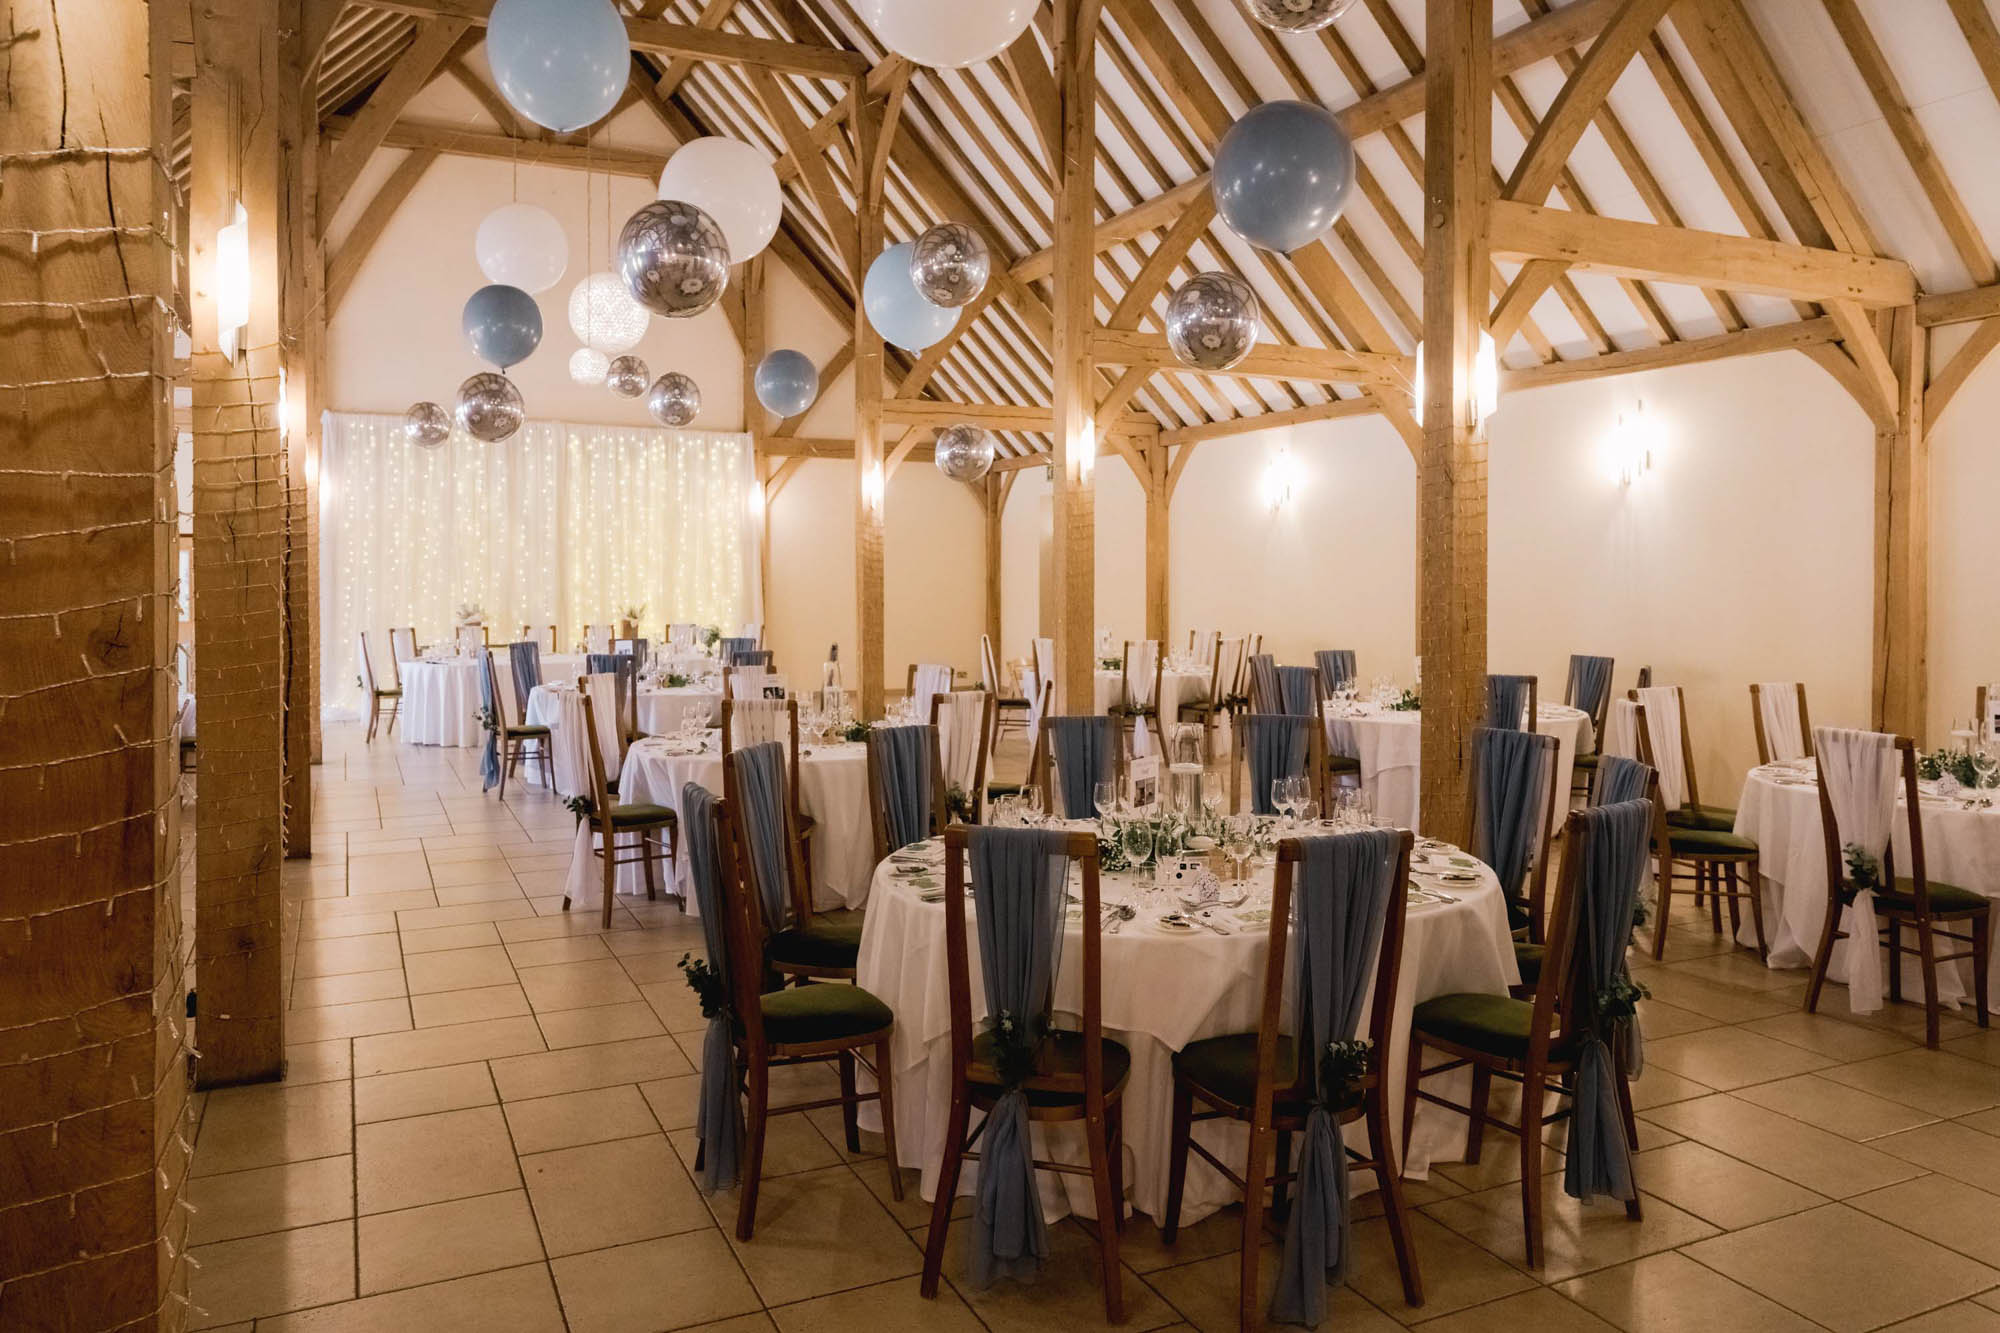 Wedding breakfast tables and chairs in the barn at Rivervale Barn in Hampshire.